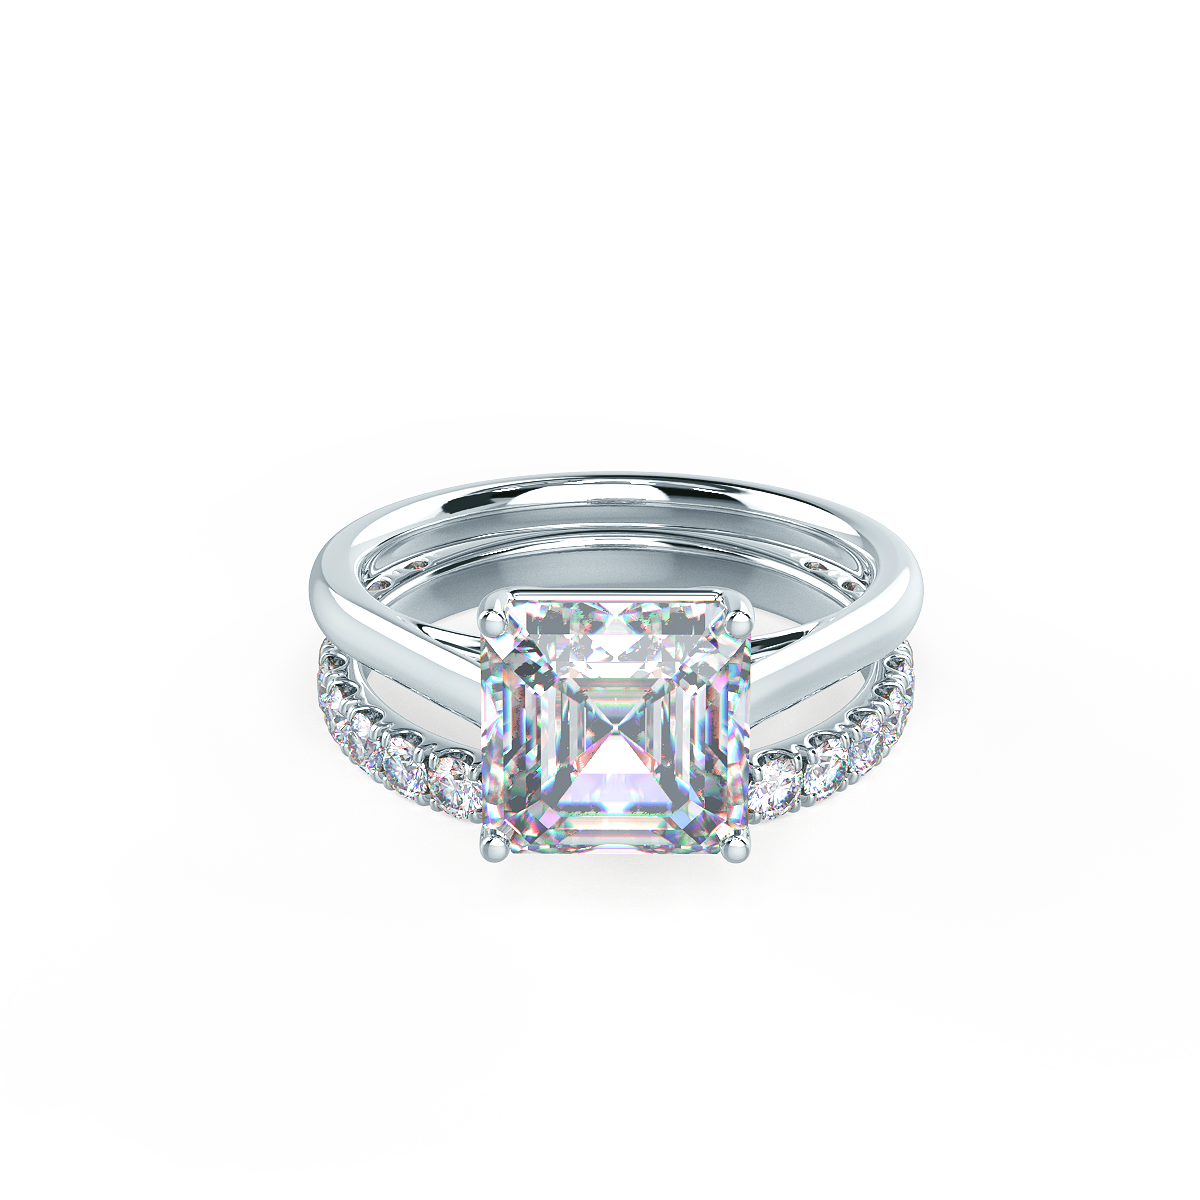   This setting pairs with a variety of wedding band styles.     View Wedding Band Details   